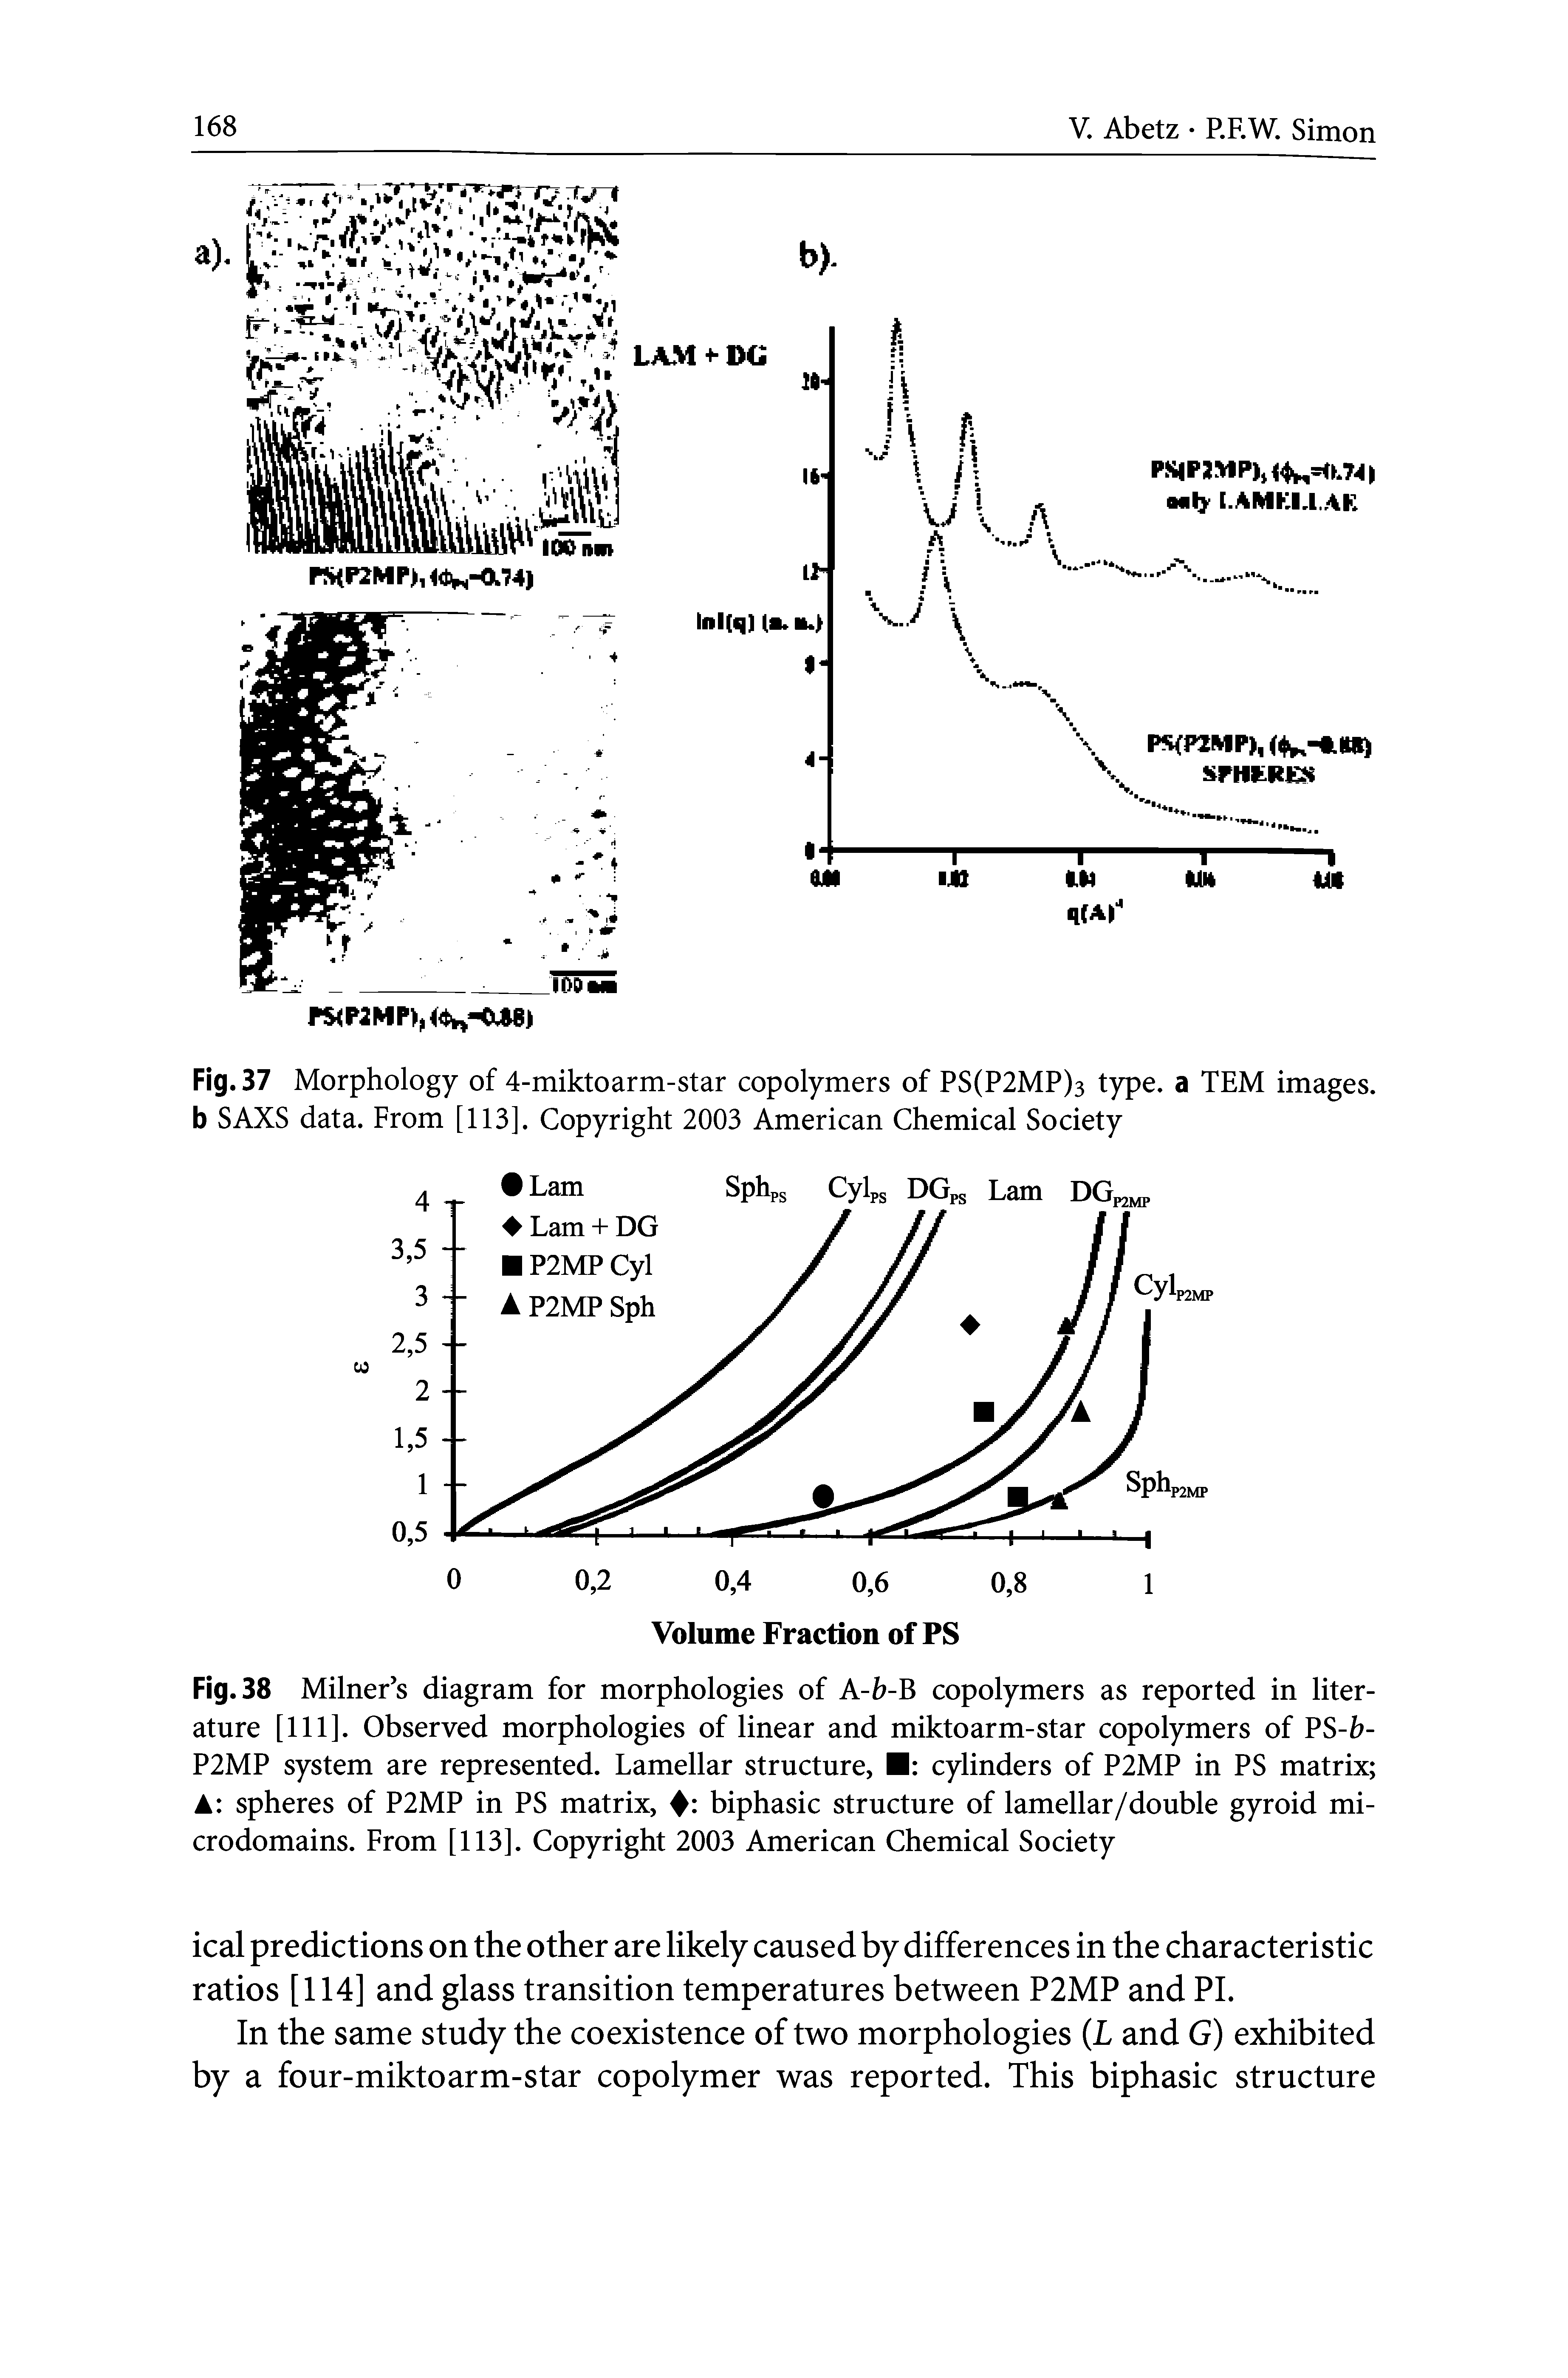 Fig. 37 Morphology of 4-miktoarm-star copolymers of PS(P2MP)3 type, a TEM images, b SAXS data. From [113]. Copyright 2003 American Chemical Society...